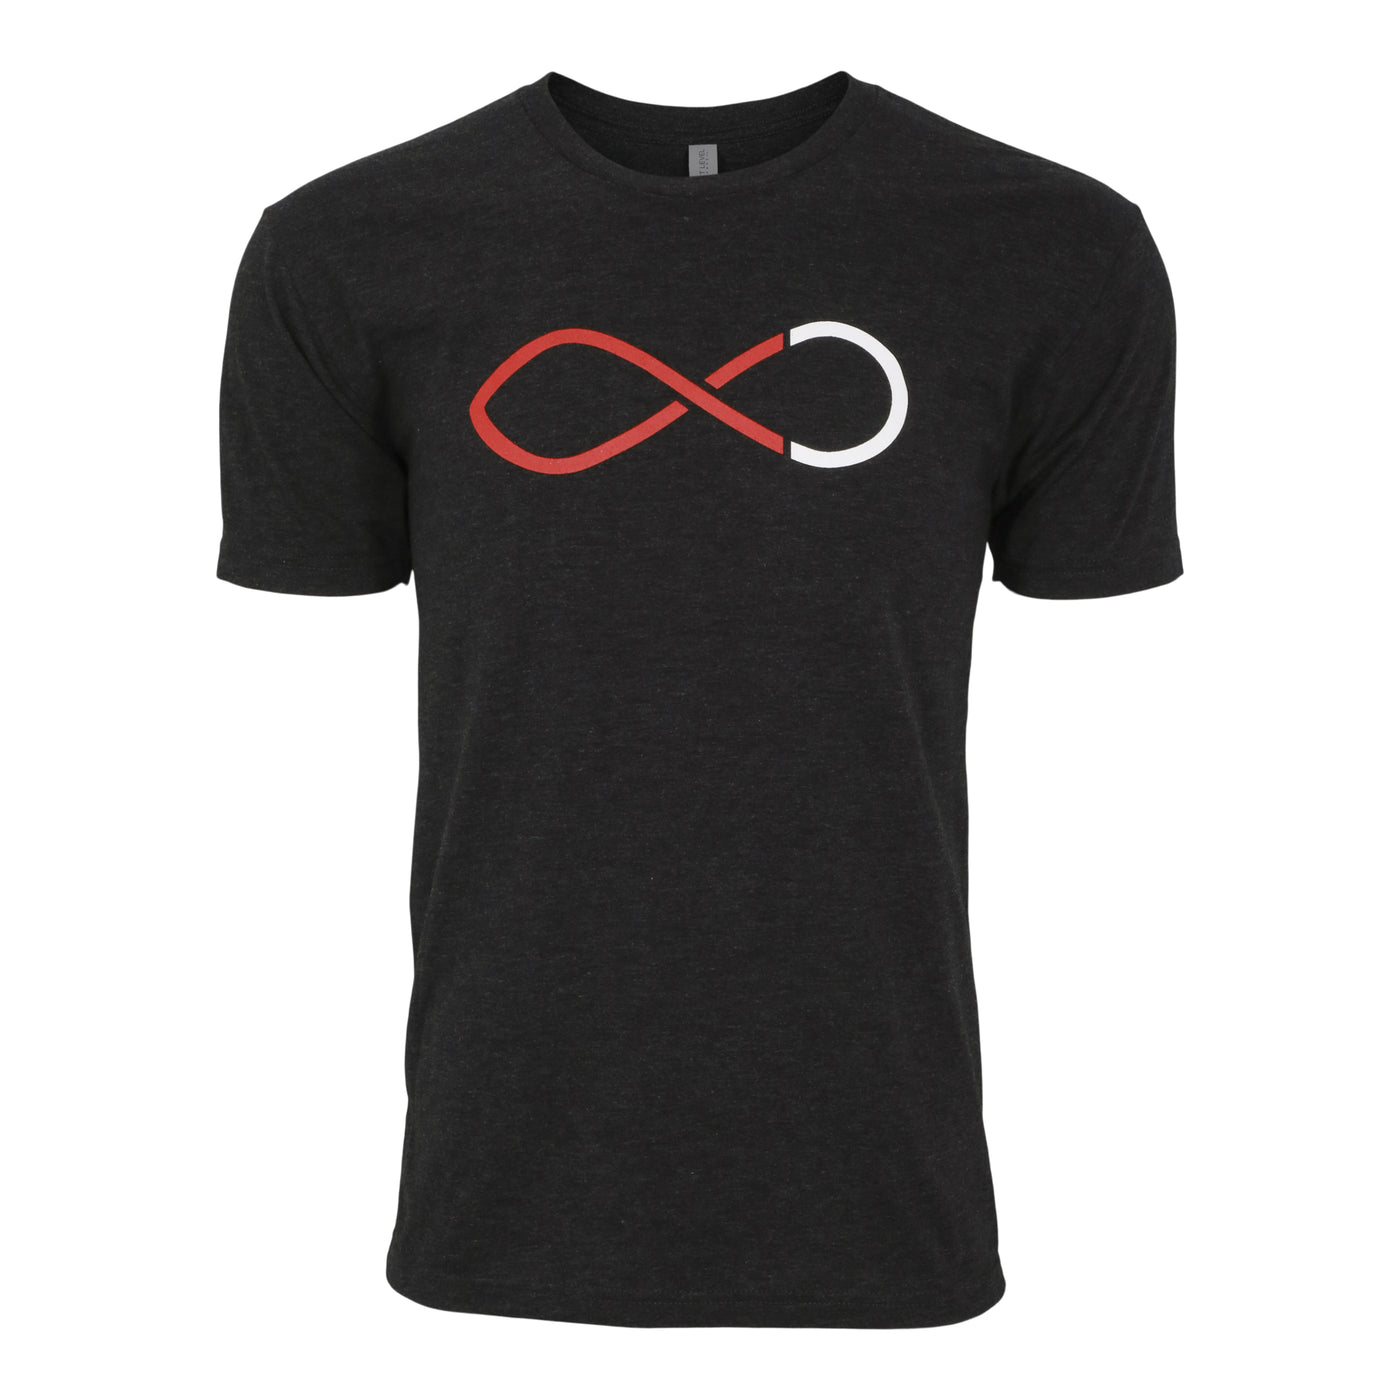 Created Infinity Ichthys Tri-Blend black T-shirt front view